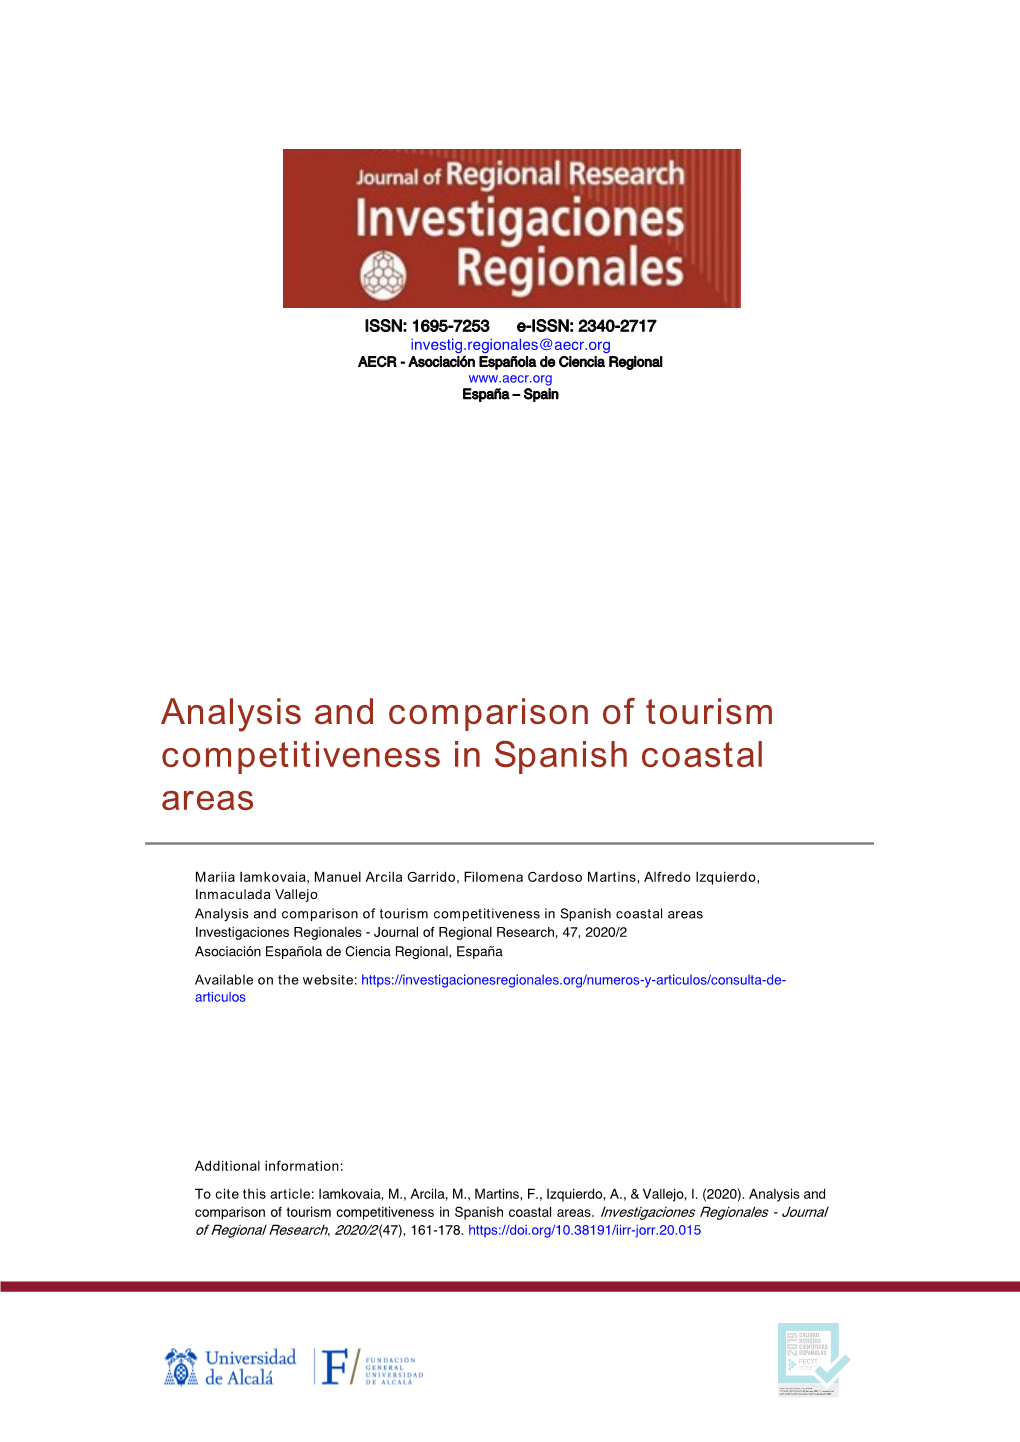 Analysis and Comparison of Tourism Competitiveness in Spanish Coastal Areas